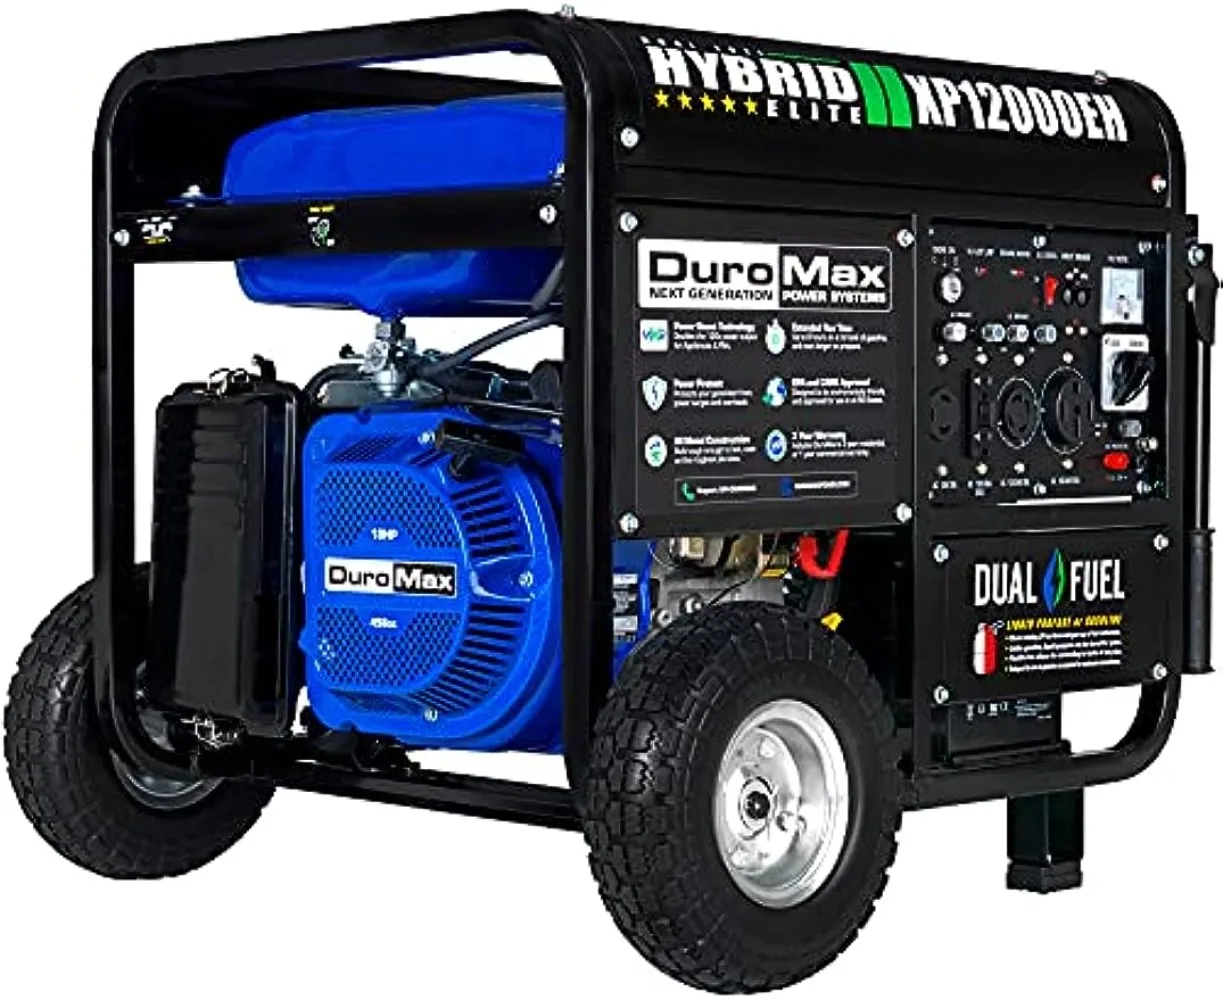 

DuroMax XP12000EH Generator-12000 Watt Gas or Propane Powered Home Back Up & RV Ready, 50 State Approved Dual Fuel ElectricStart